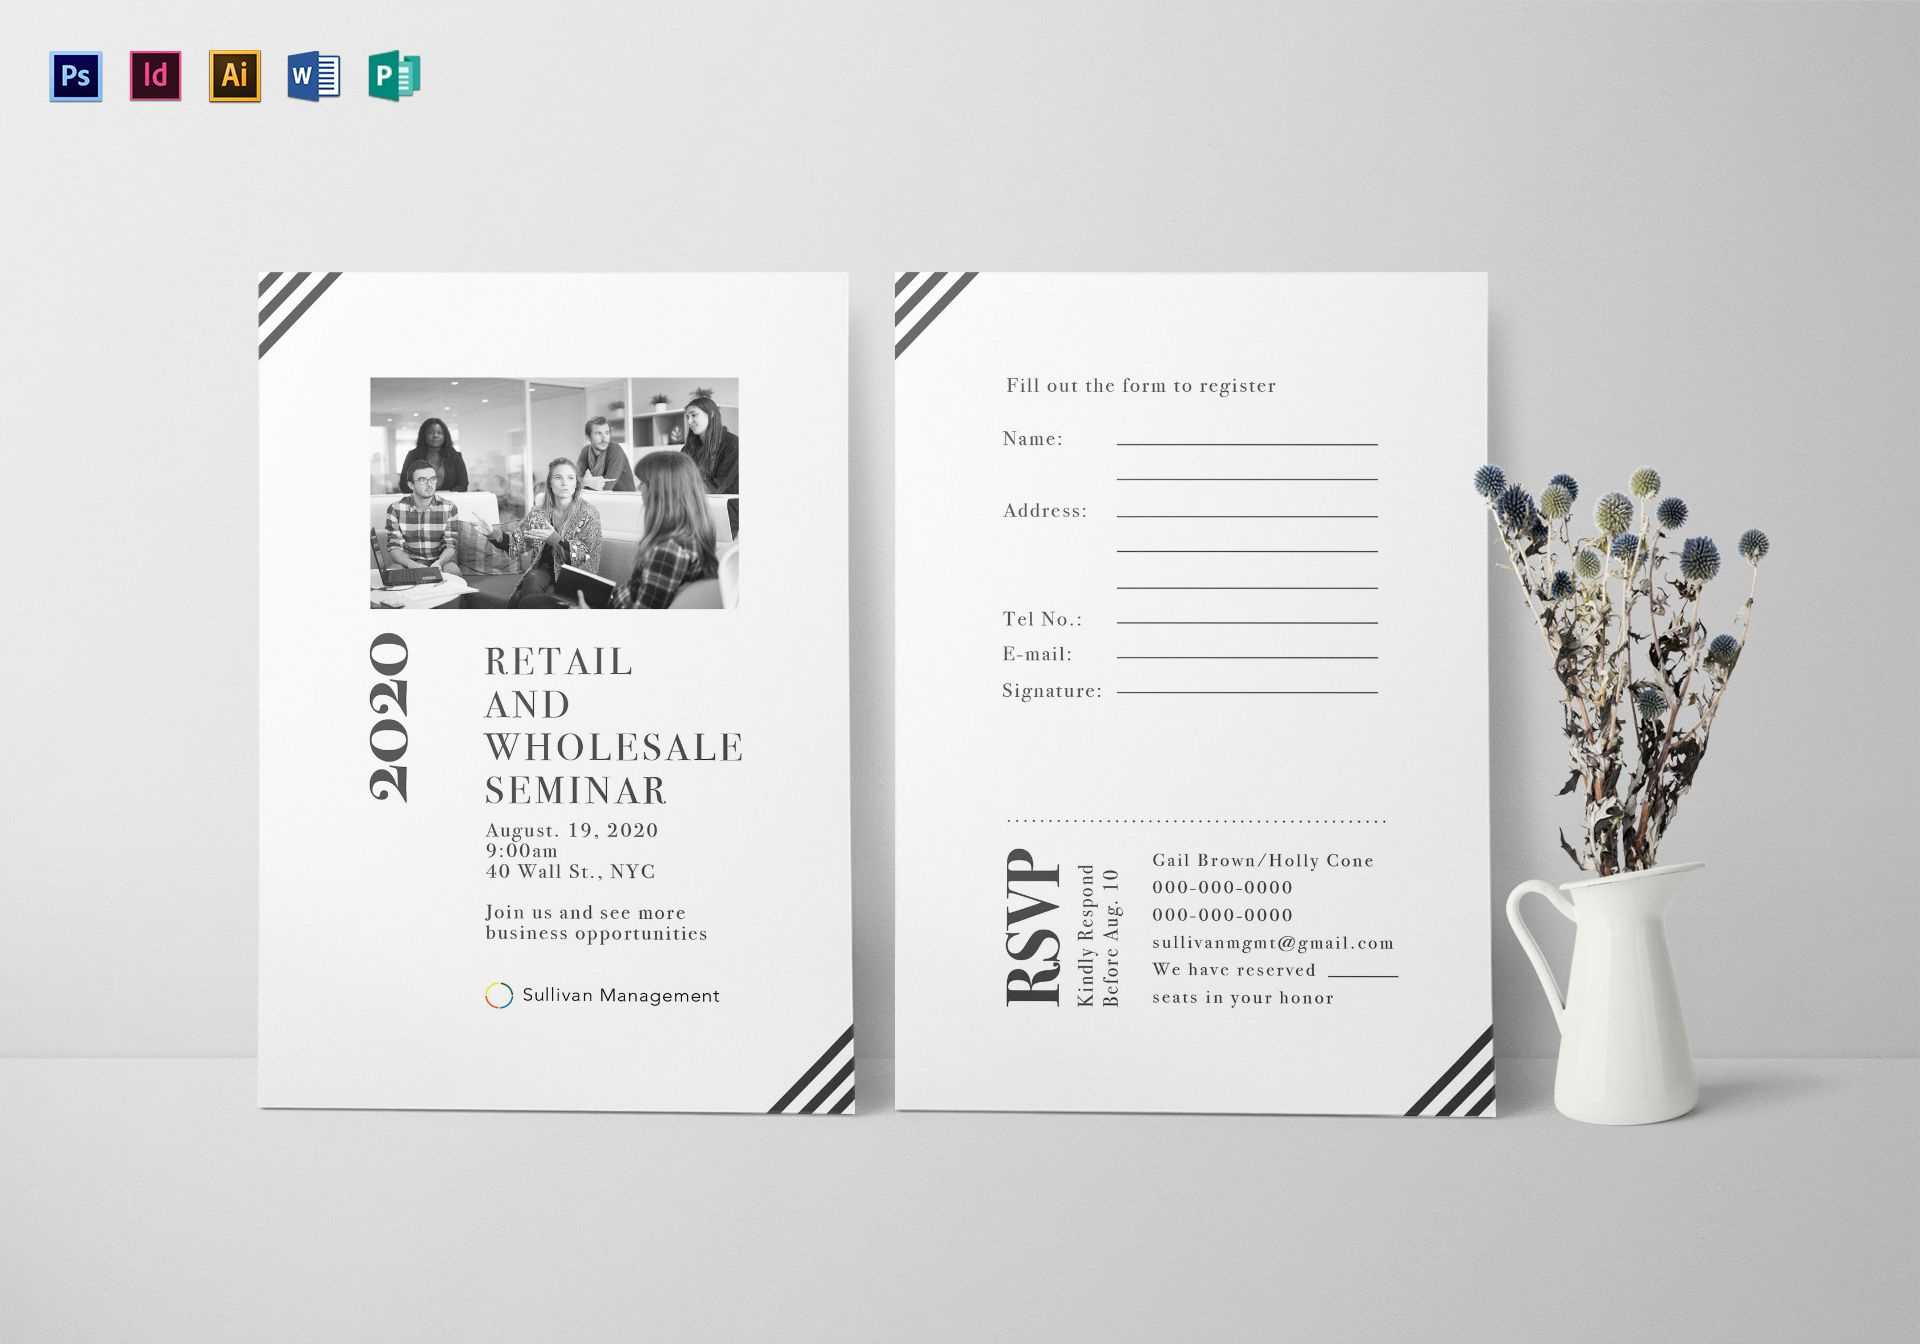 Seminar Invitation Card Template Intended For Seminar Invitation Card Template